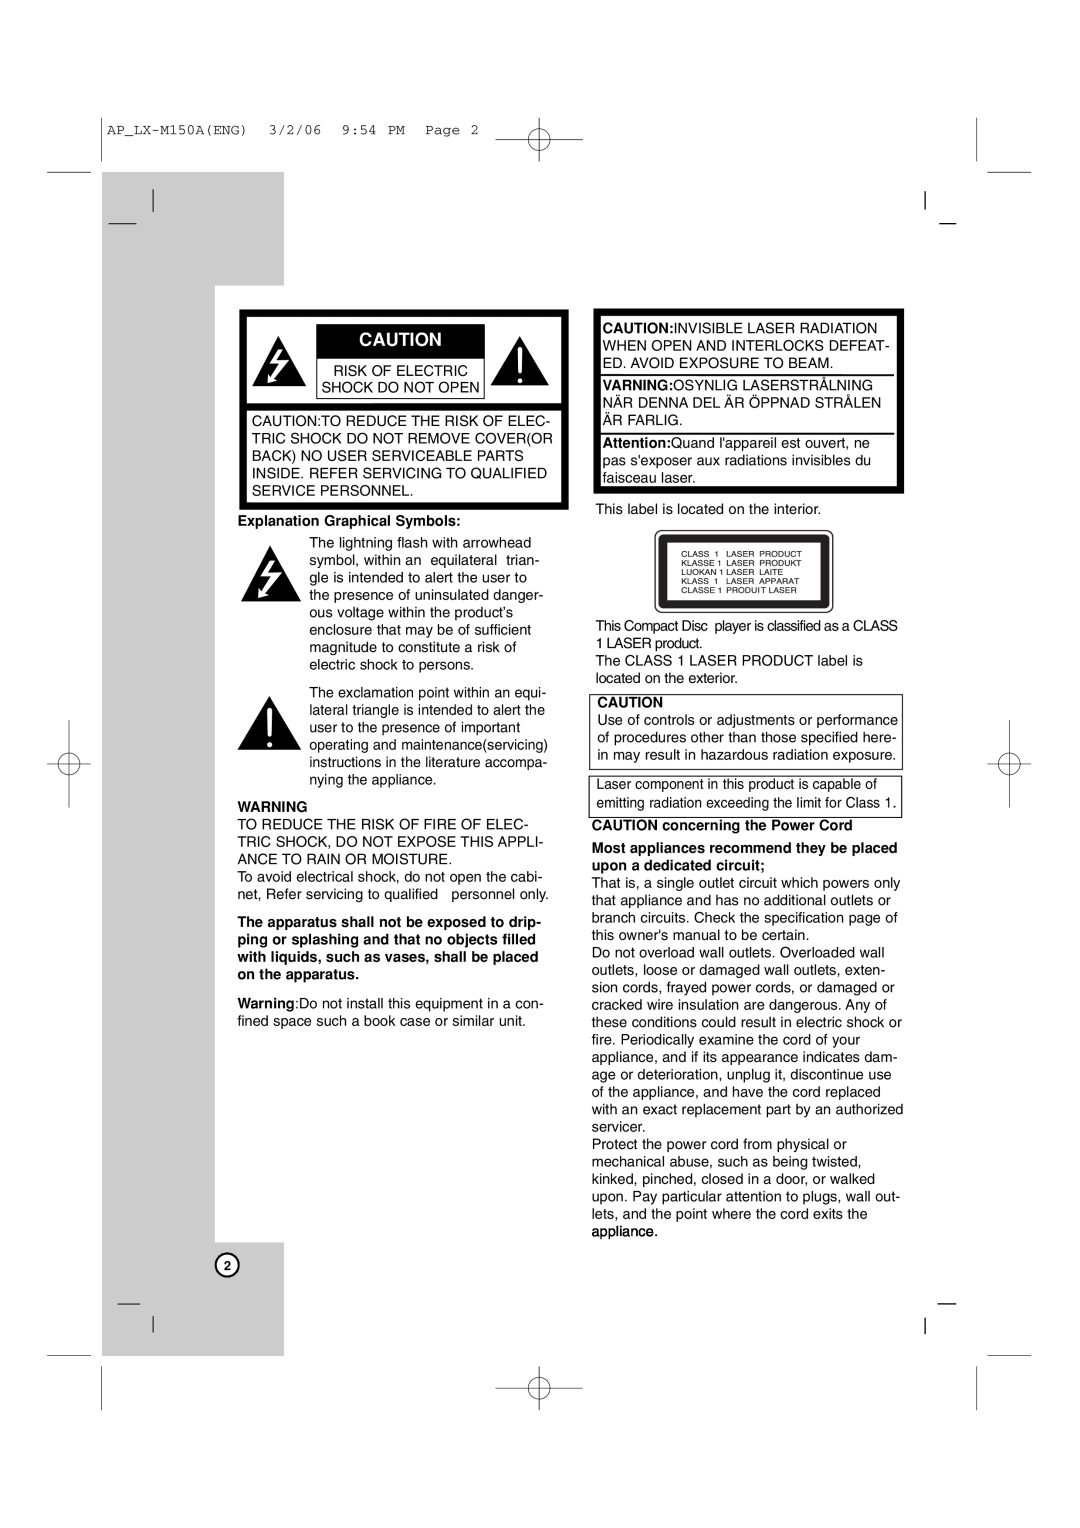 LG Electronics LX-M150 owner manual Explanation Graphical Symbols, CAUTION concerning the Power Cord 